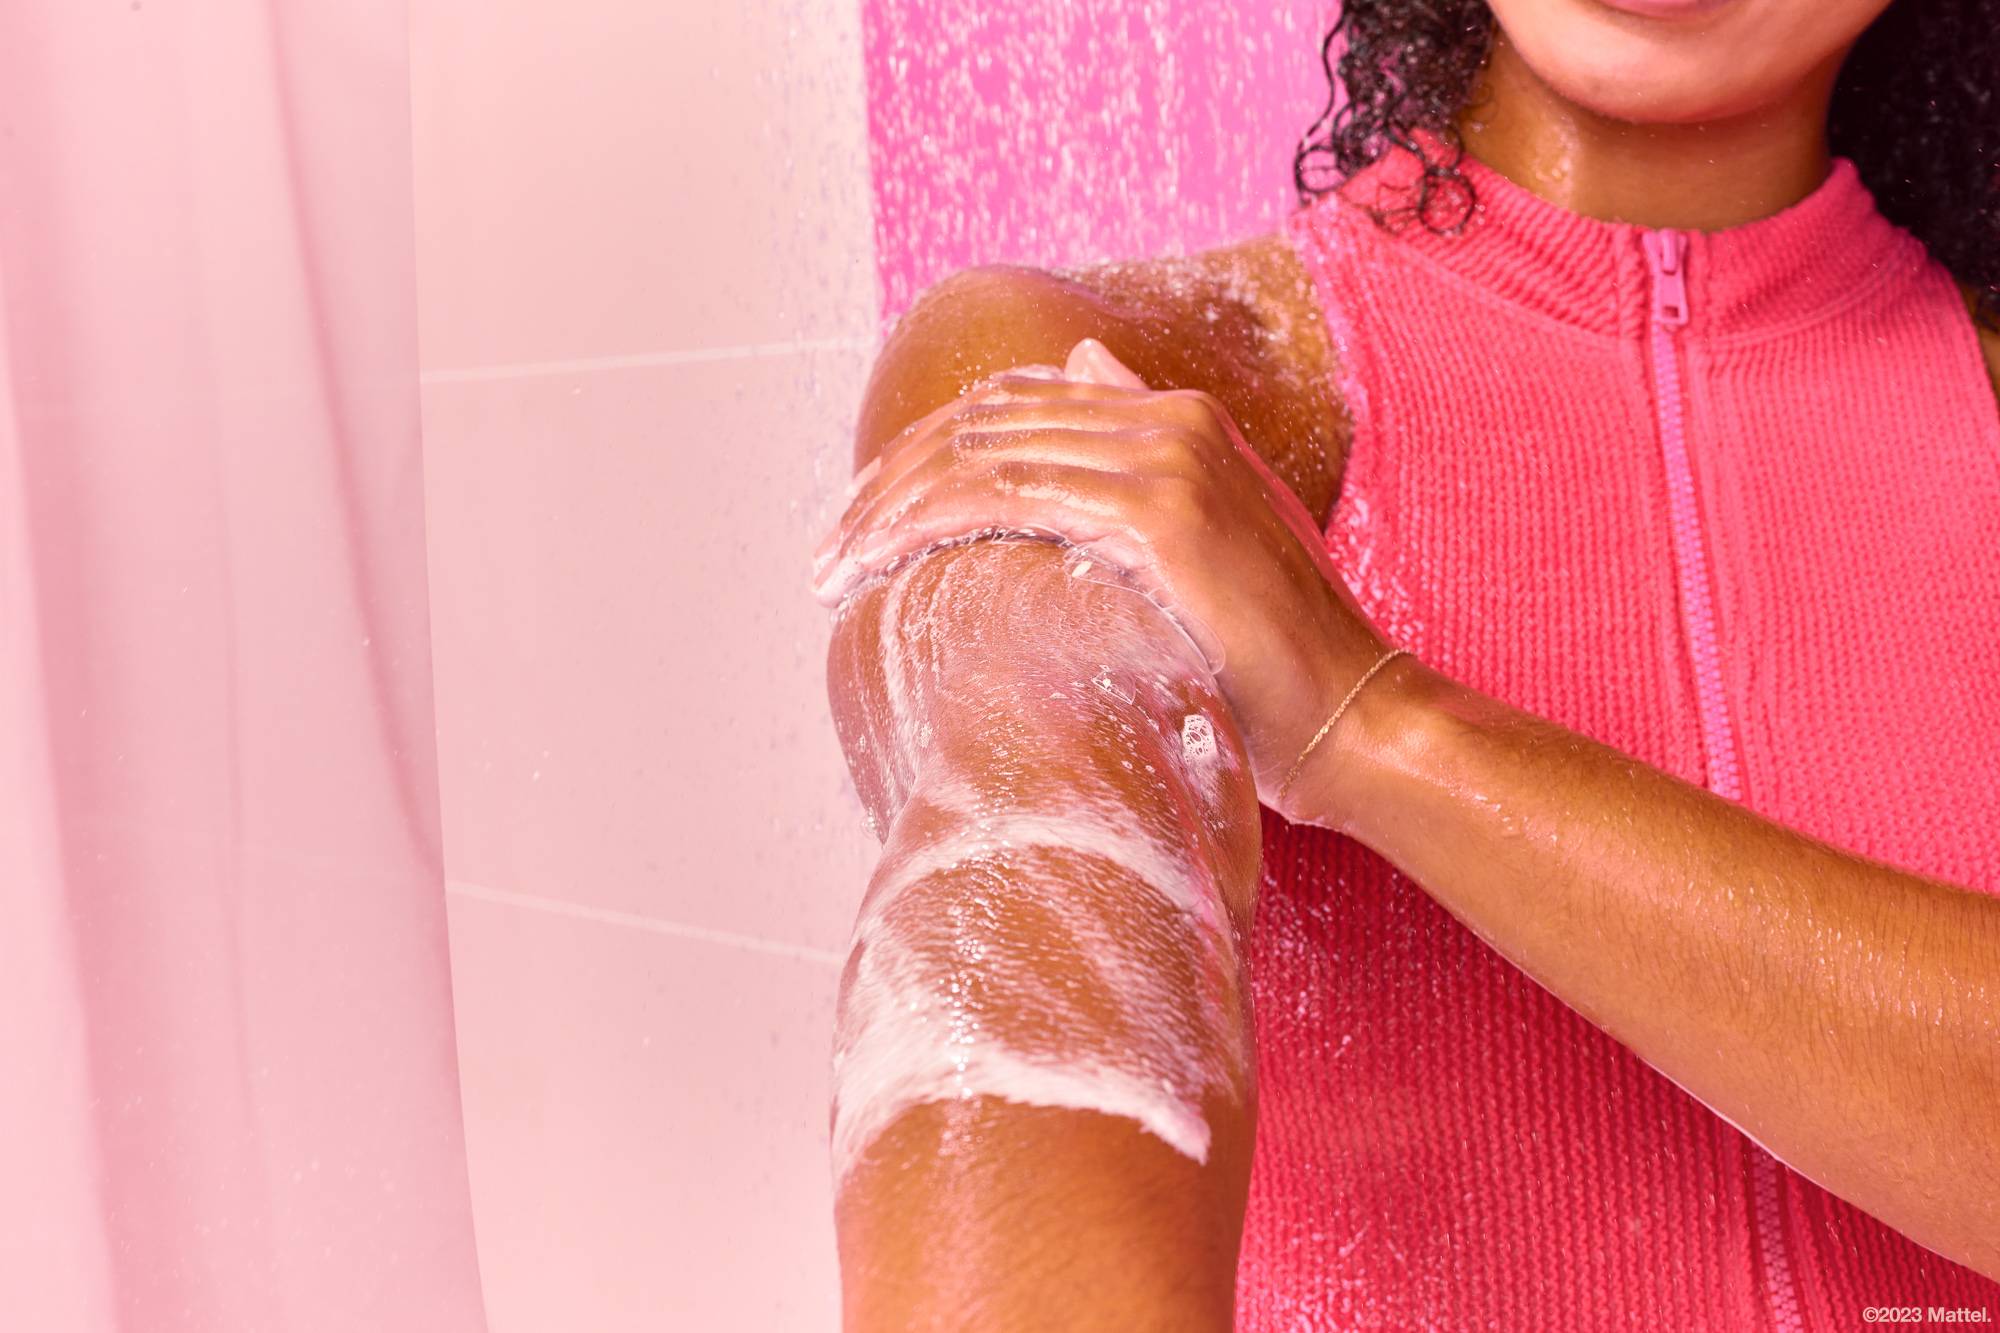 Close-up of model's arm under running shower water as the model exfoliates the Barbie Dream body scrub over their skin.